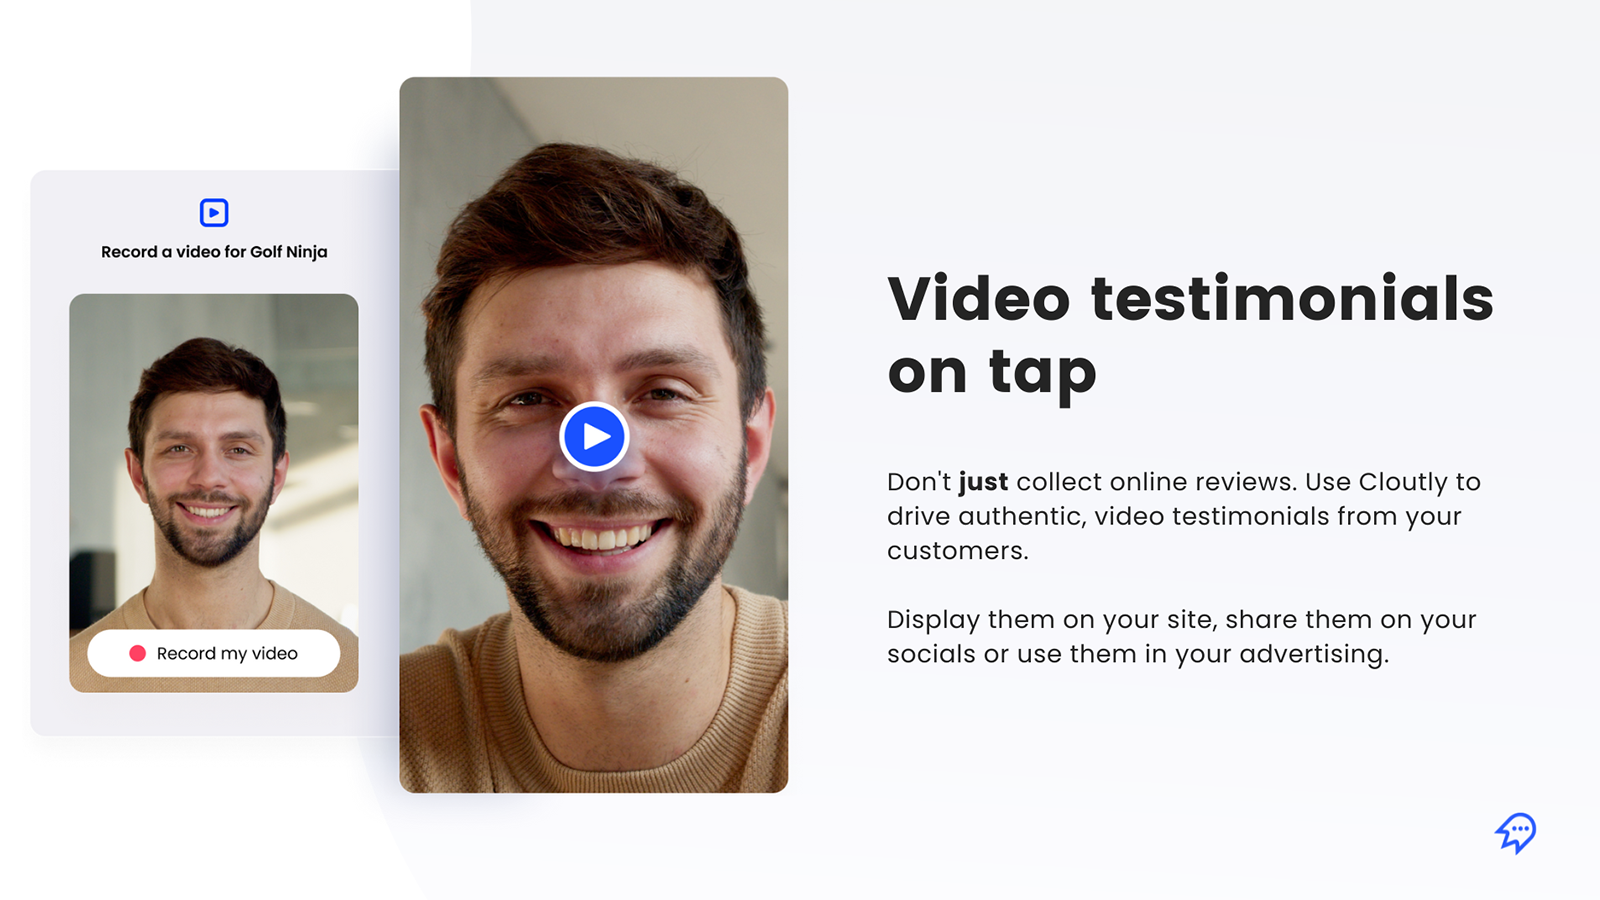 Collect video testimonials from customers